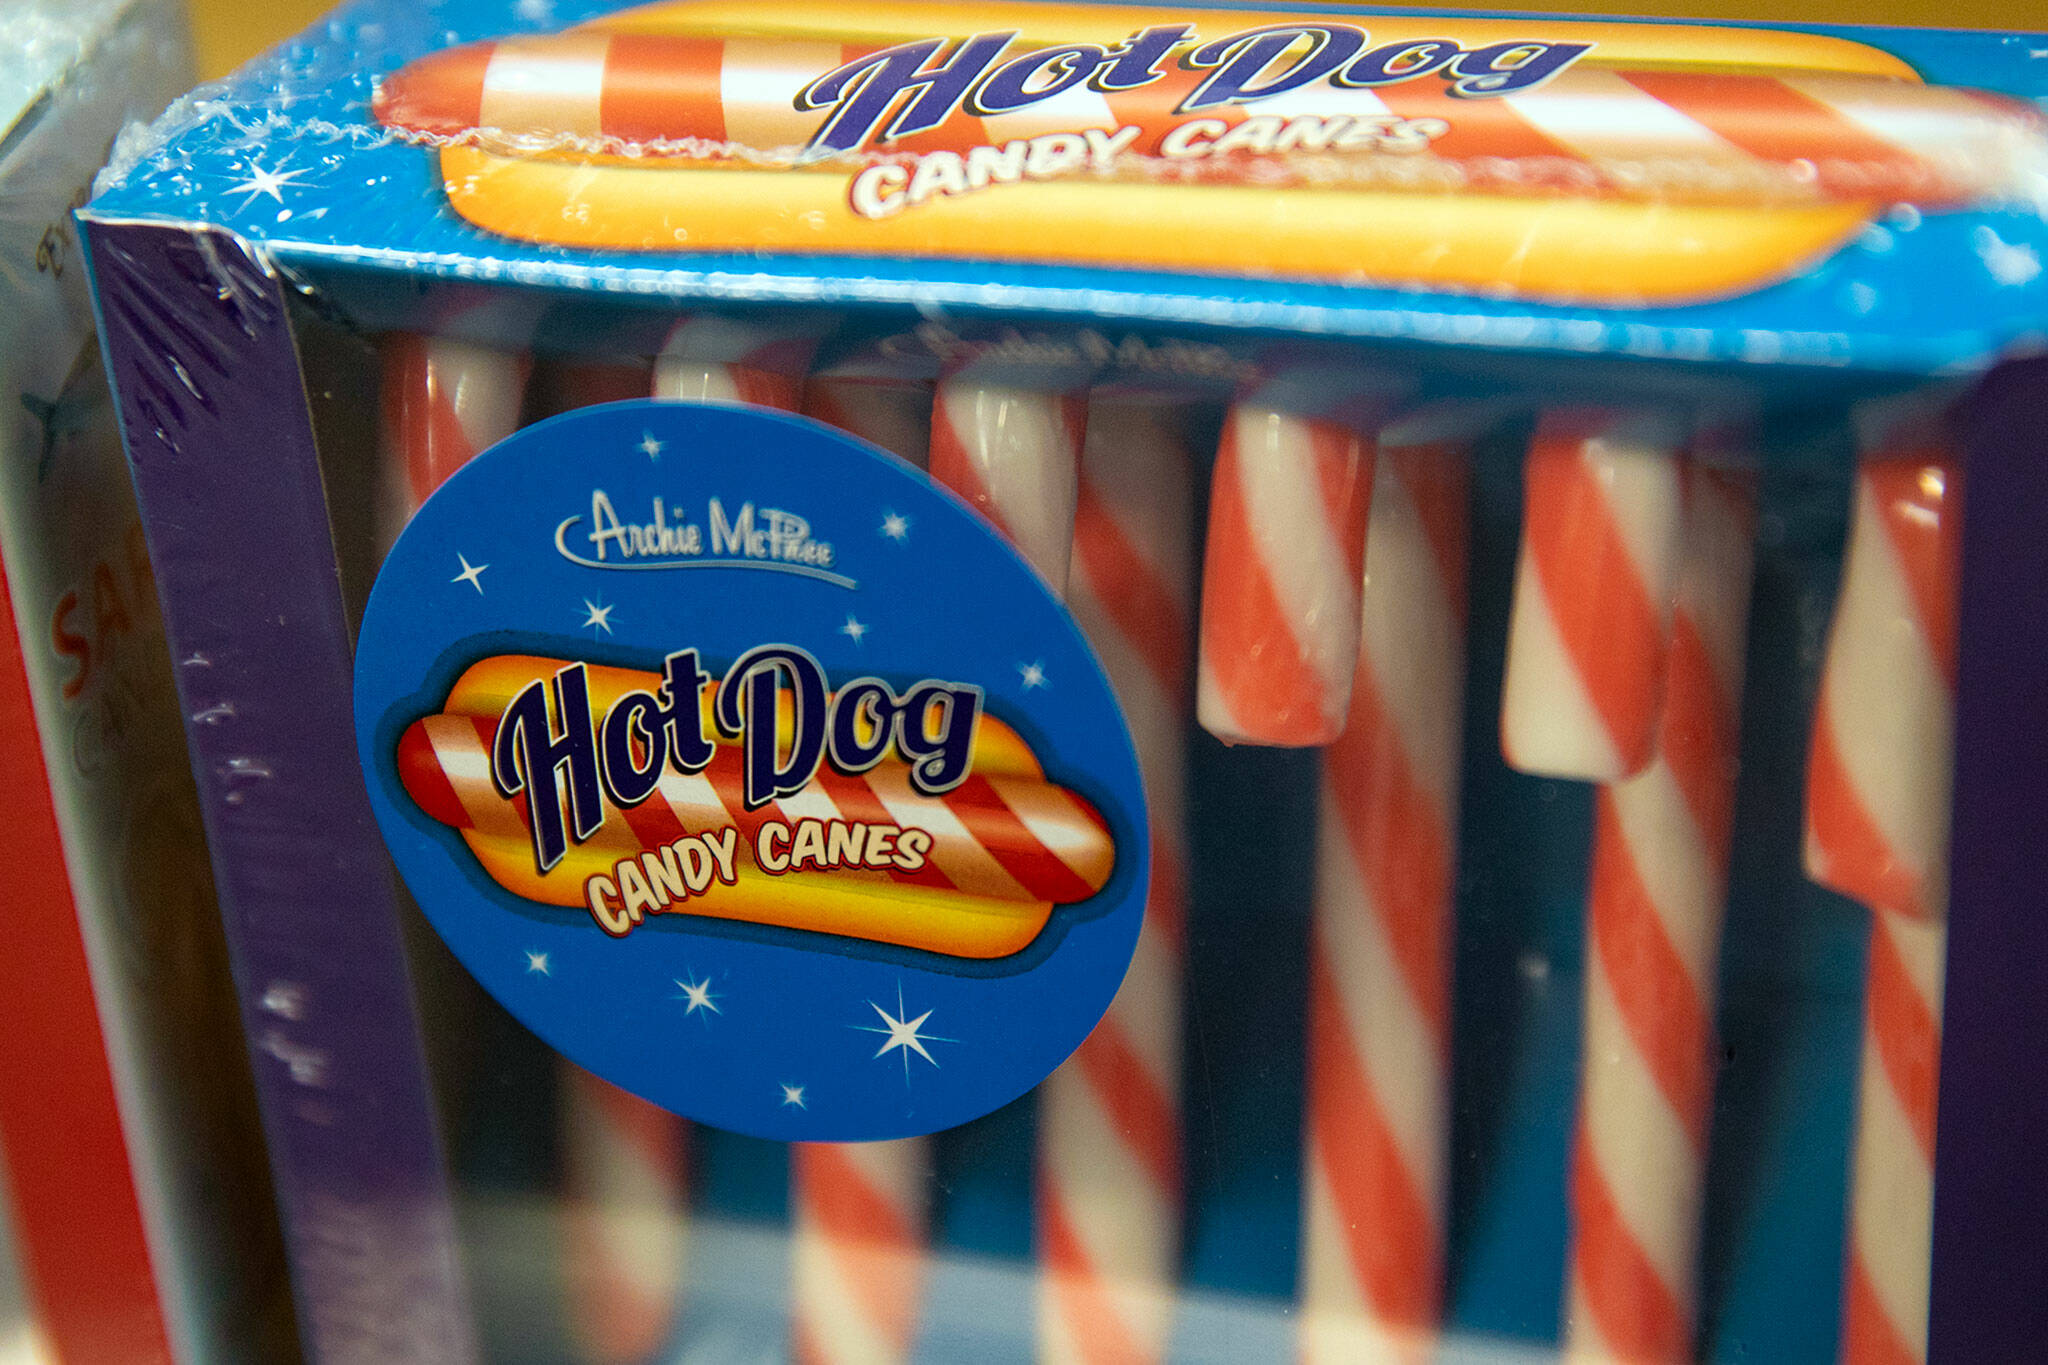 A pack of hot dog candy canes, which look suspiciously like a normal candy canes but have a taste reminiscent of the water left over from boiling some franks, sits on a shelf at the Archie McPhee wholesale building. (Ryan Berry / The Herald)